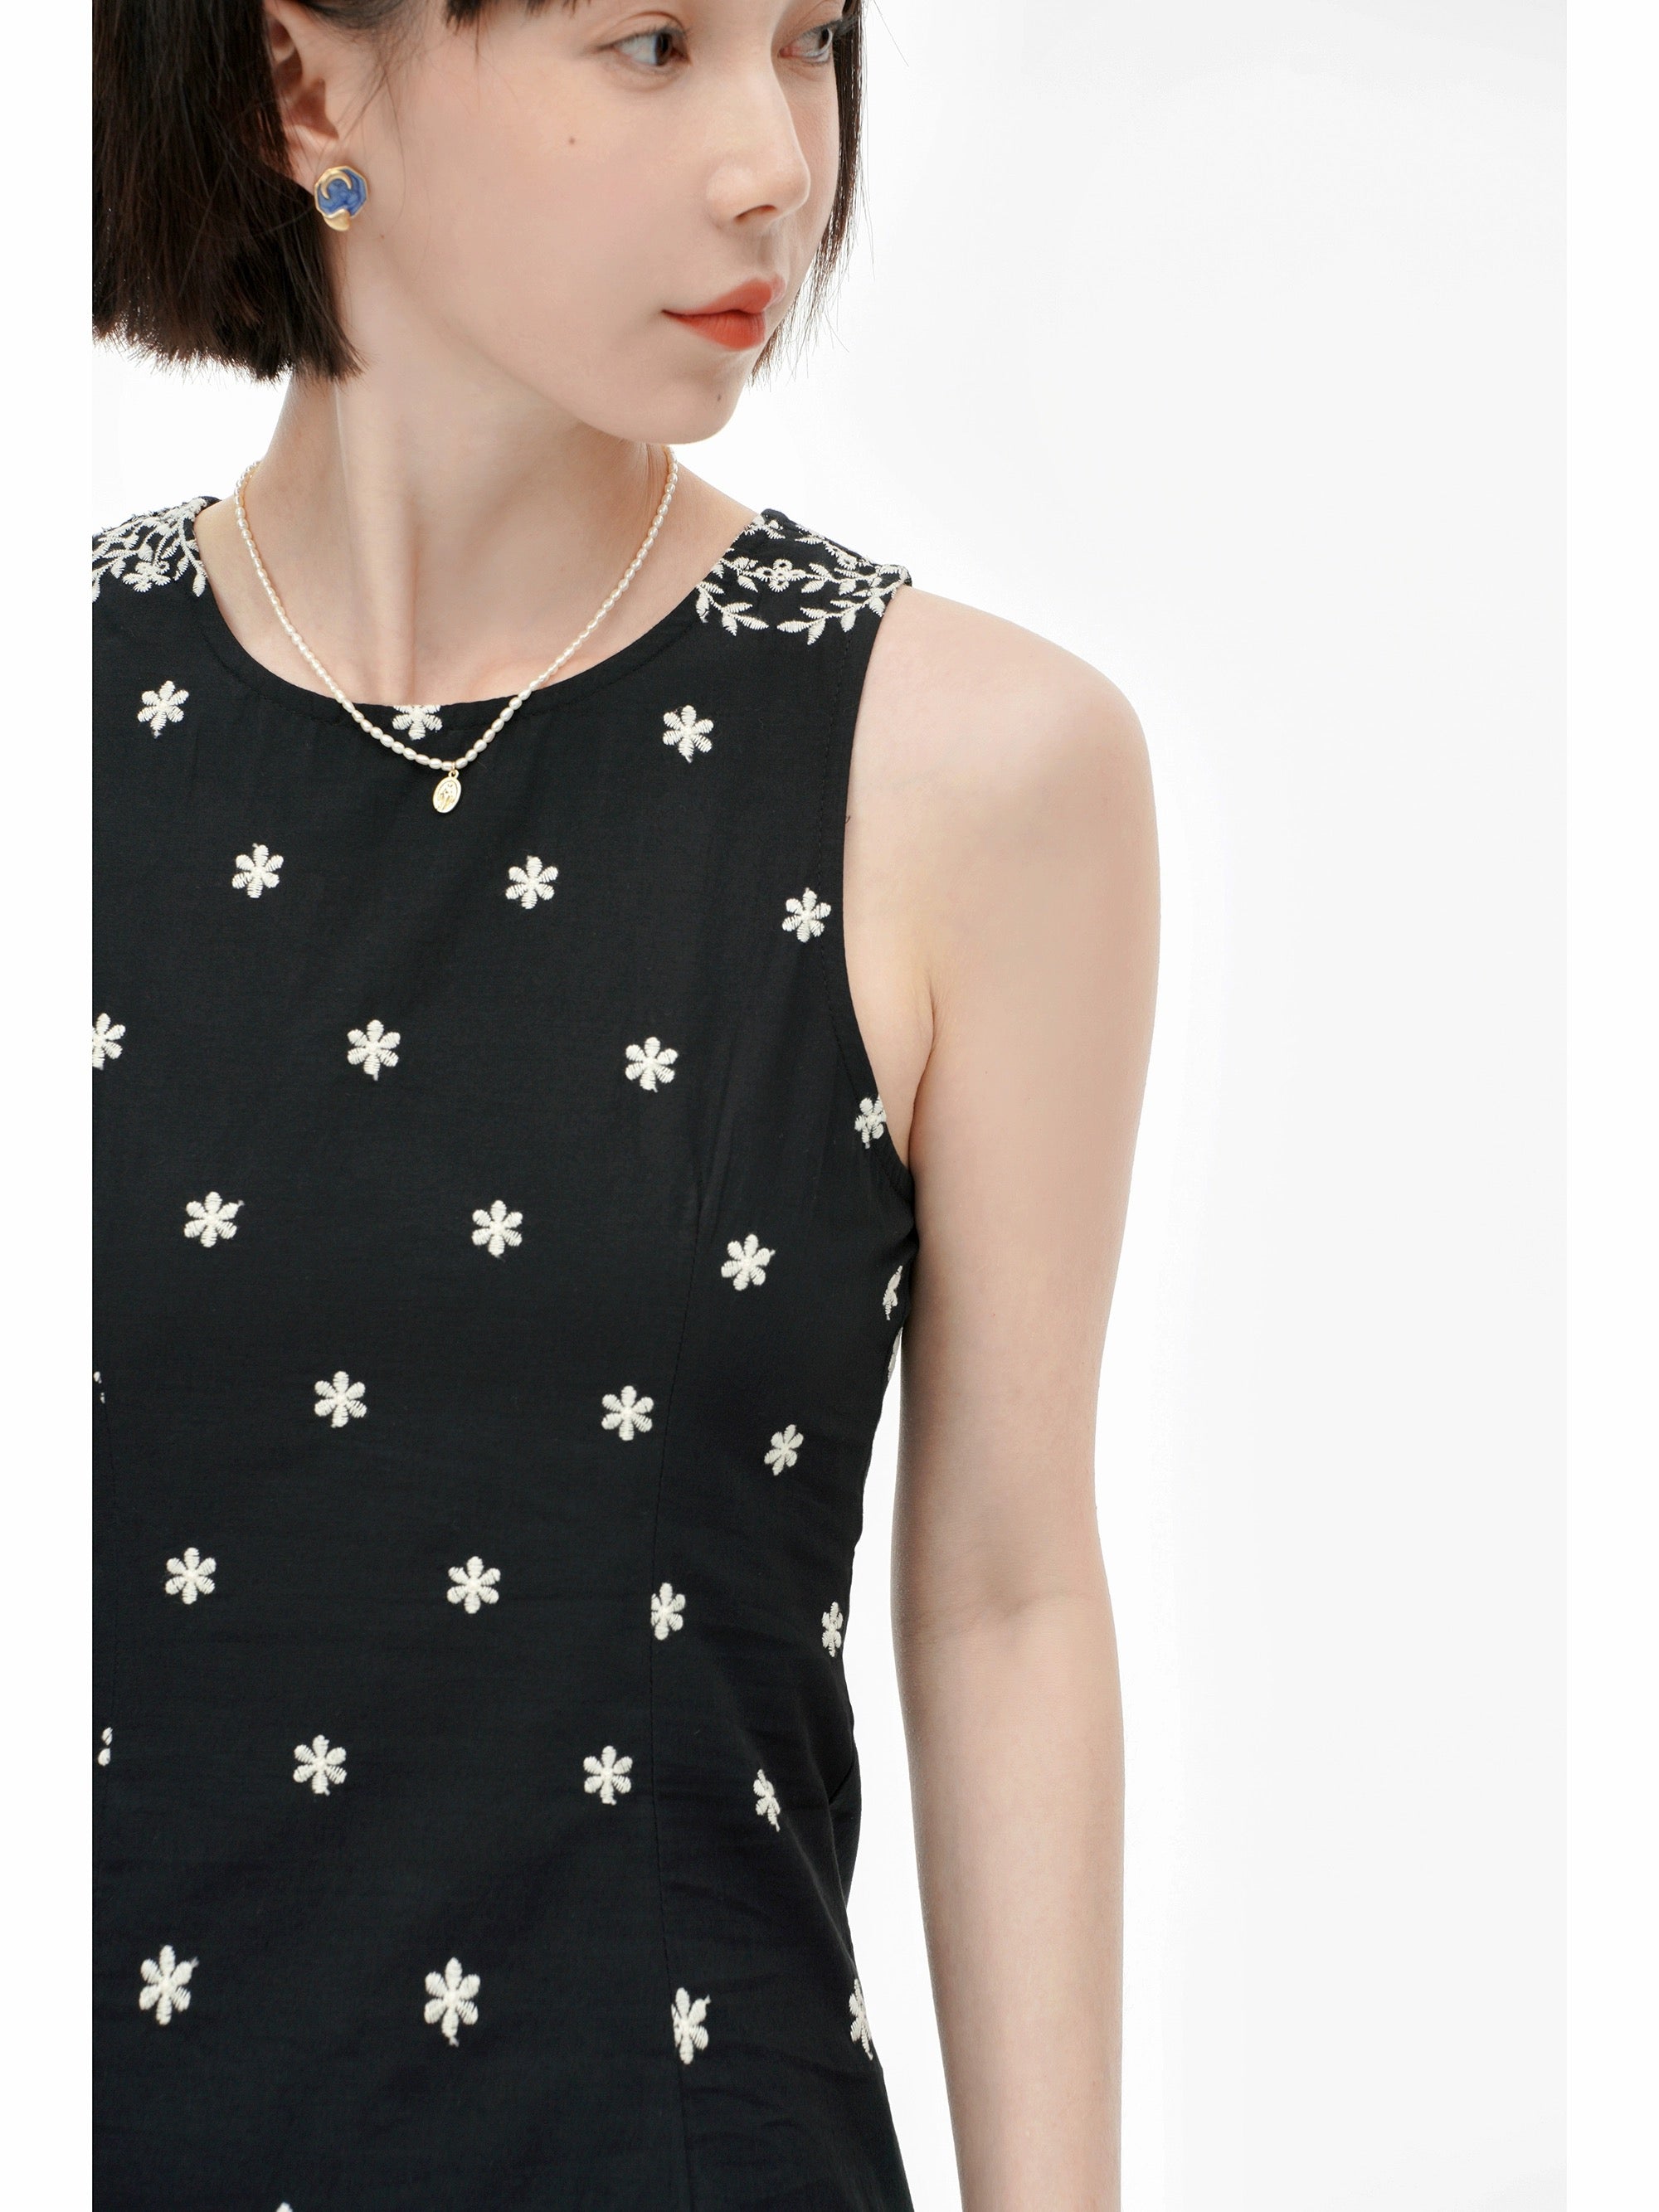 Embroidered Floral Shift Dress in Black